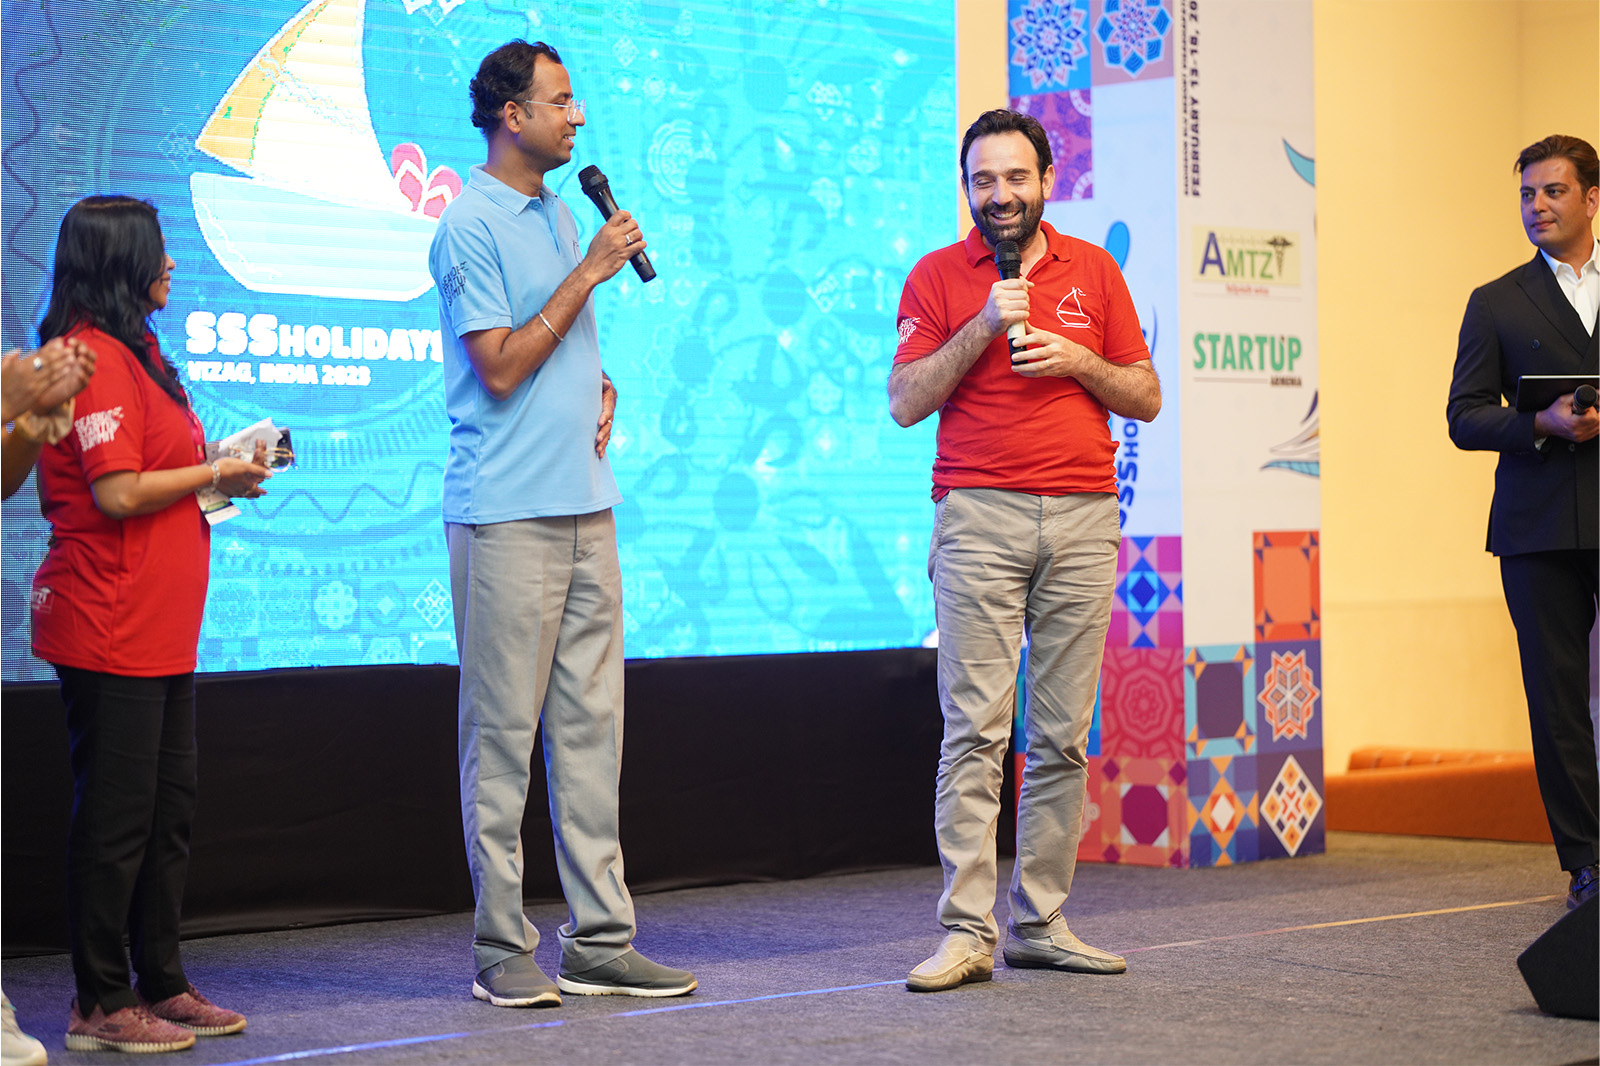 Collaborative Encounter: Dr. Jitendra Sharma, MD & Founder CEO of AMTZ, connects with Dr. Hakob Hakobyan, Founder of Seaside Startup Summit, during the SSS event to discuss AMTZ Medical Care and Health Care Technology in India